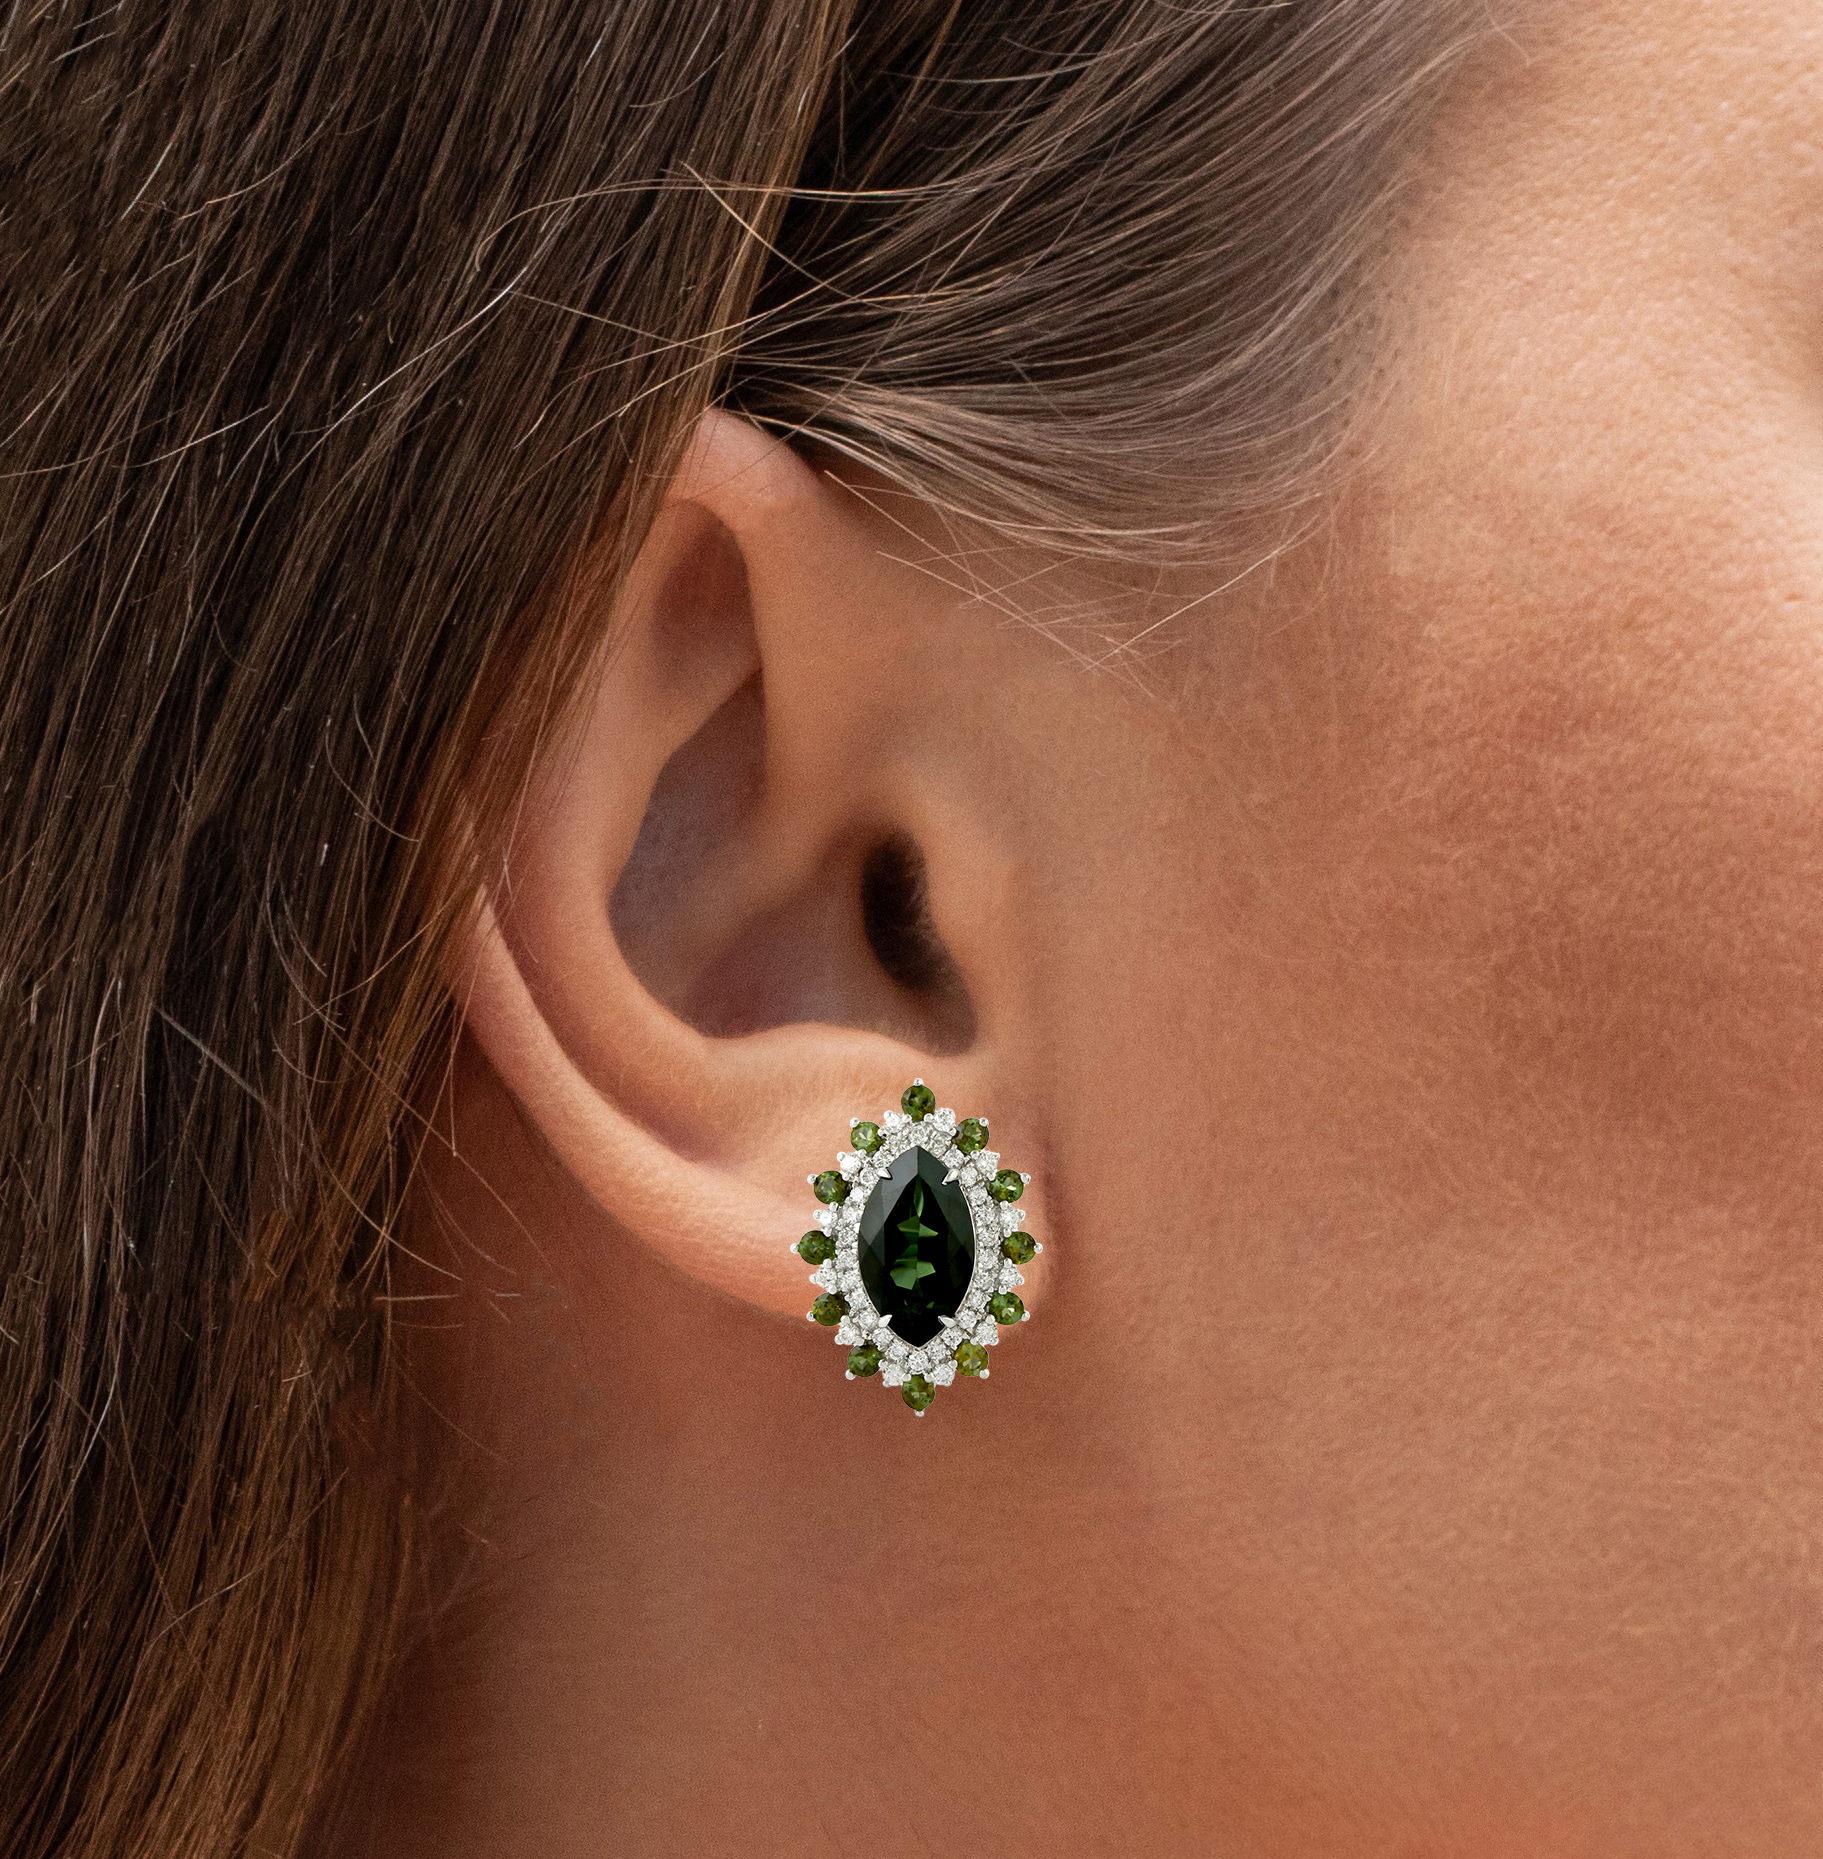 Contemporary Stunning Natural Green Tourmalines And Diamonds Earrings 18K Gold 6.68 Carats For Sale